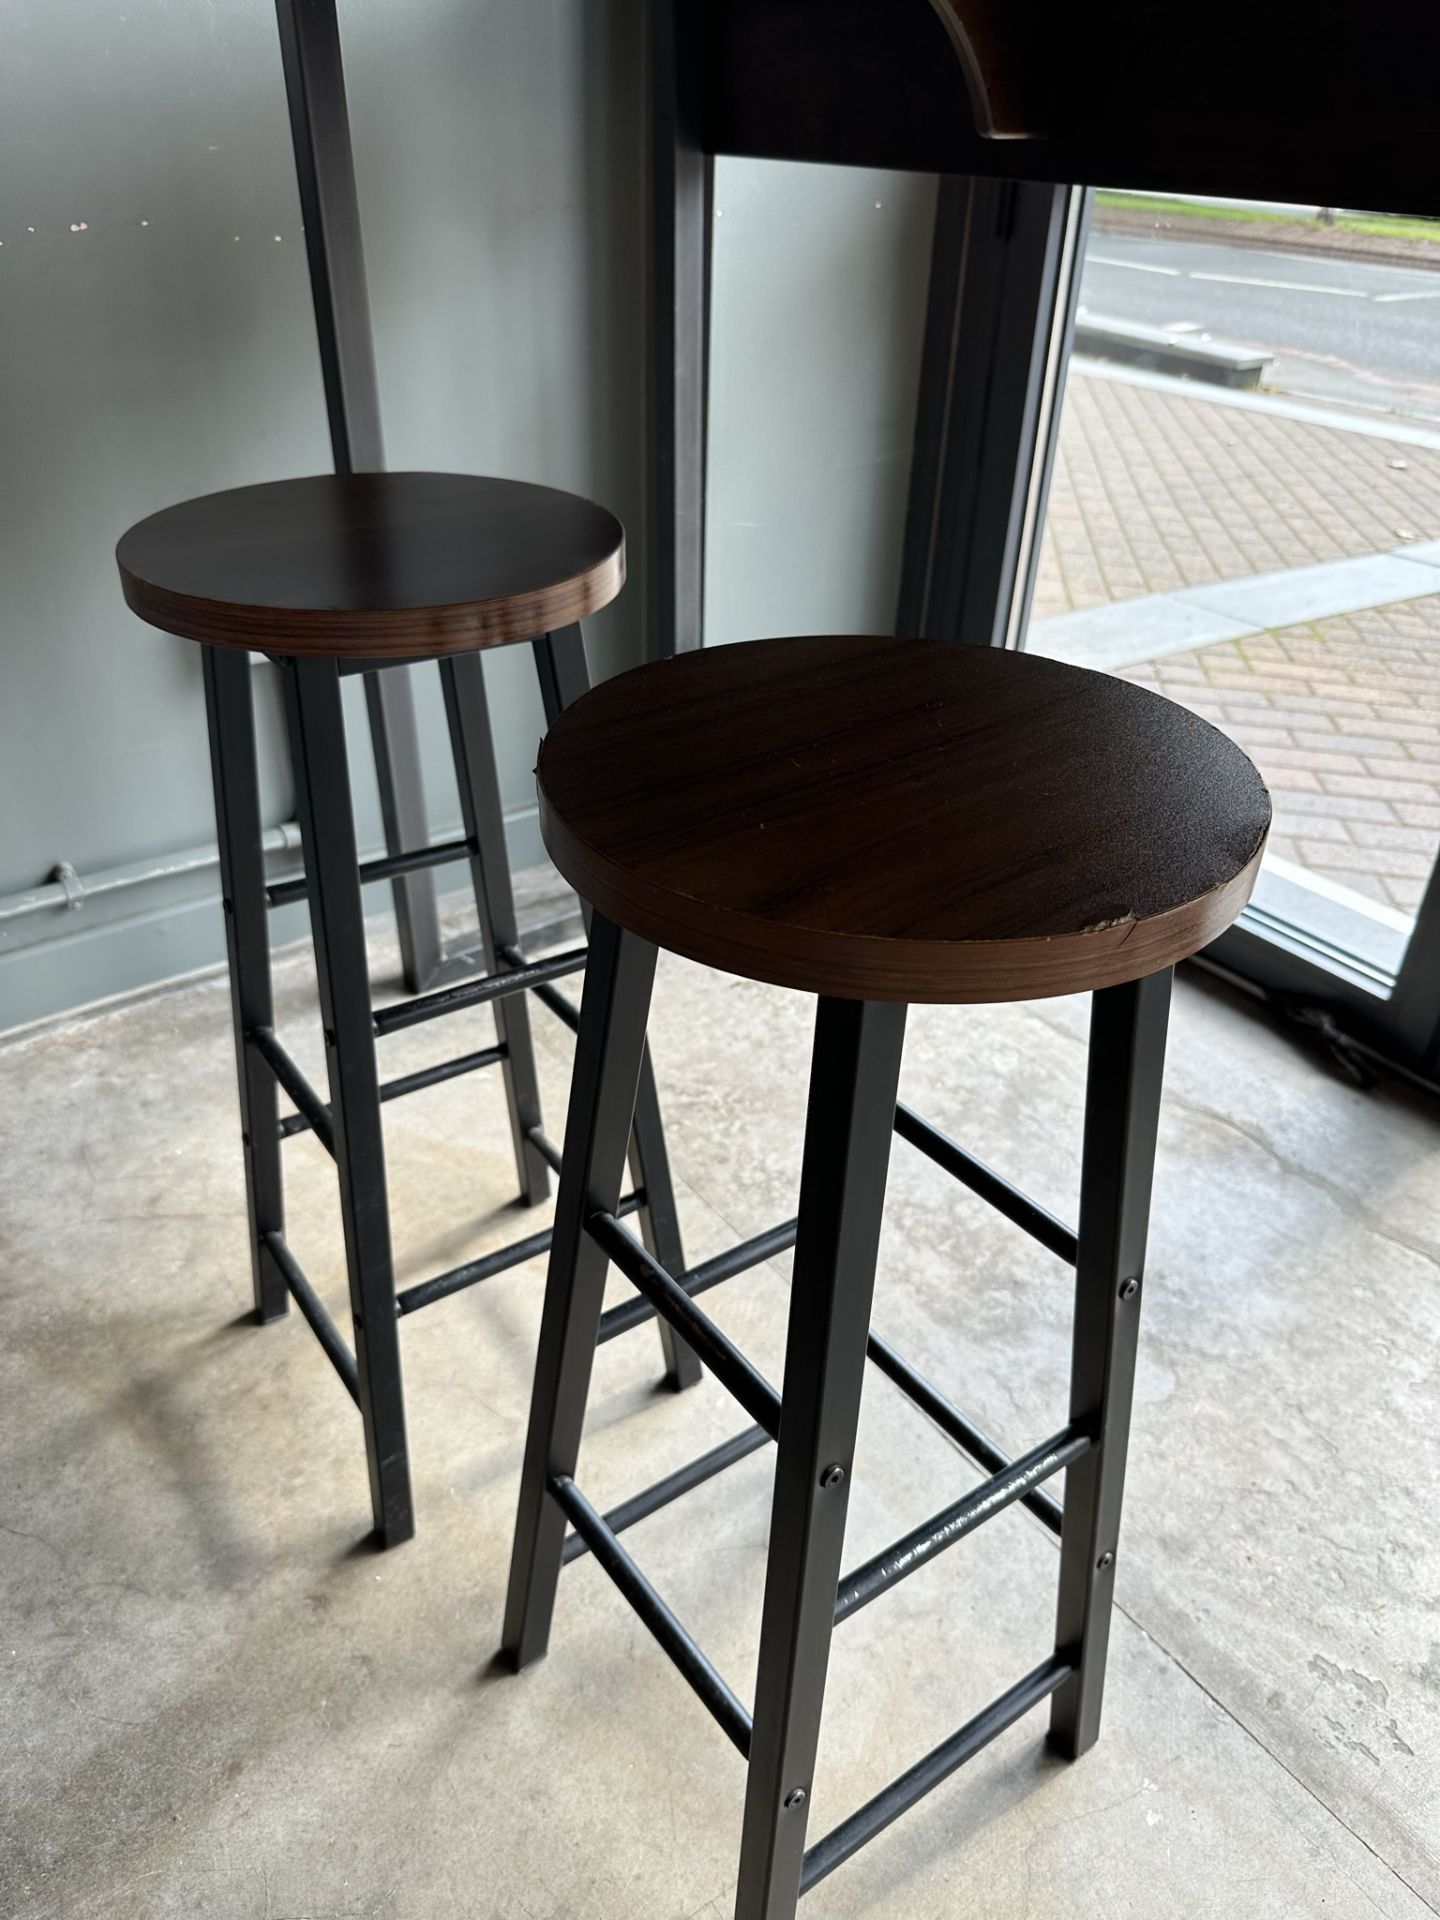 High Wooden Table With Stools With 2 Stools - Image 3 of 4